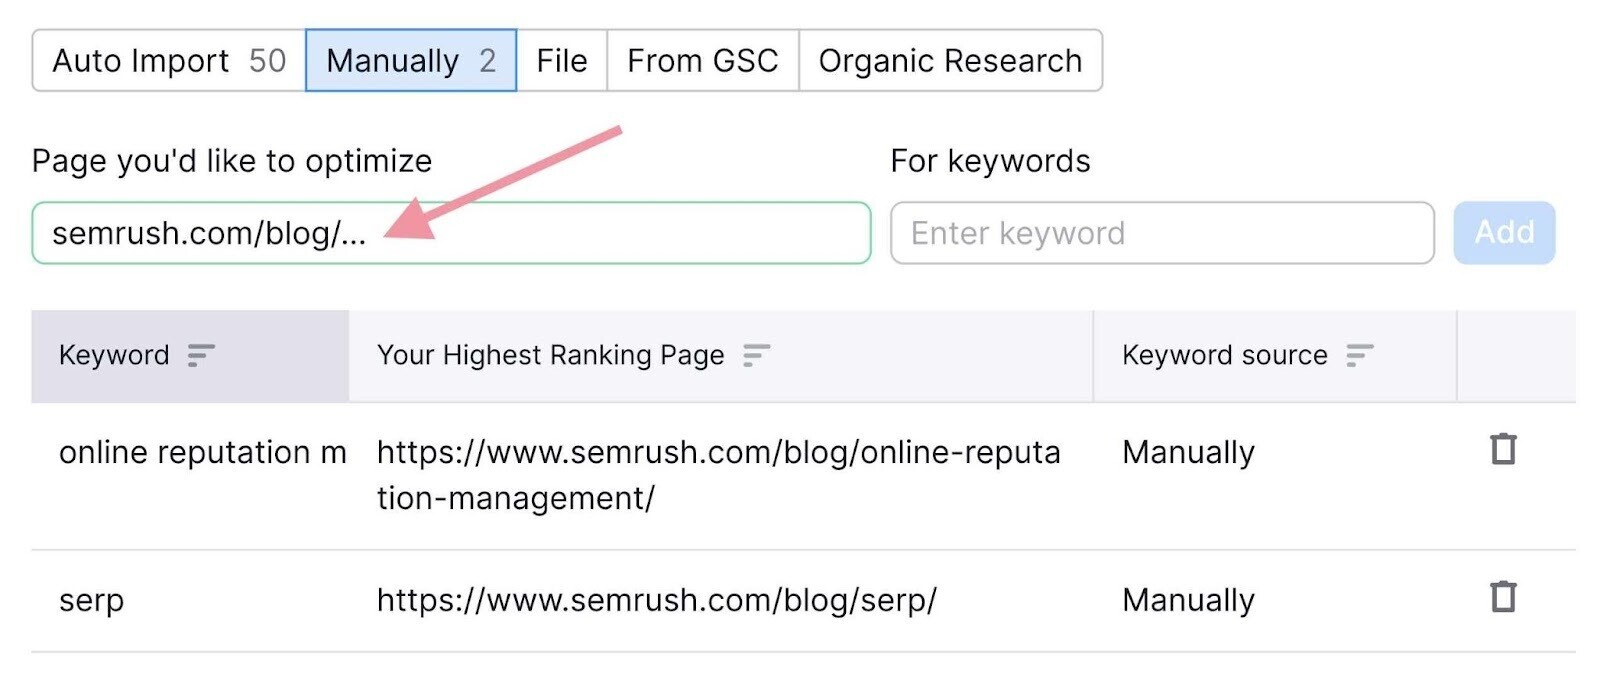 select pages and keywords to analyze